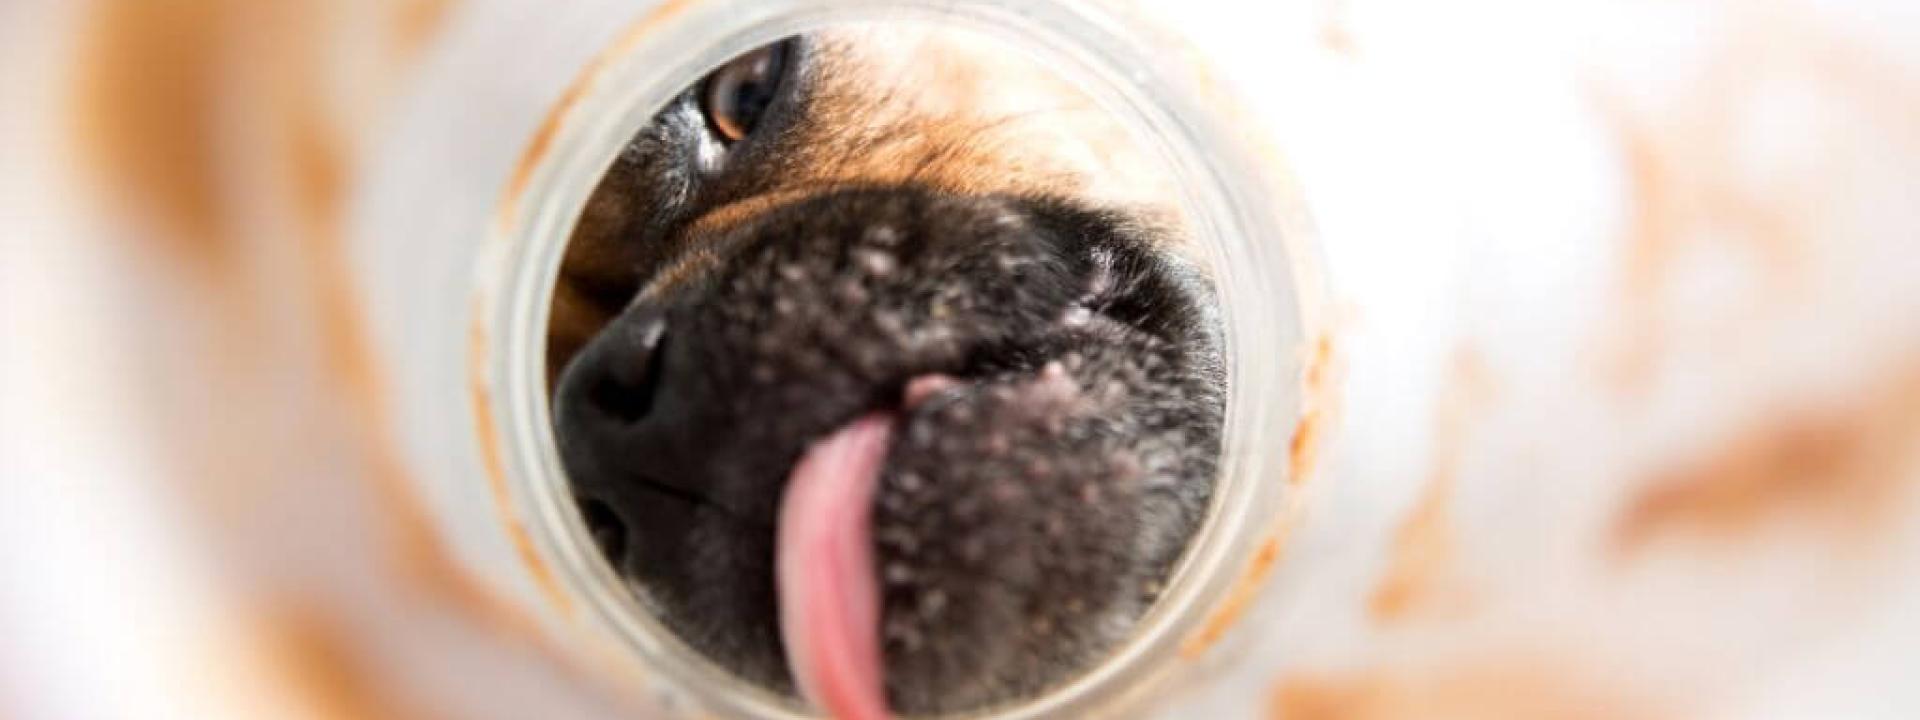 National Peanut Butter Day: How This Tasty Treat Benefits Your Dog